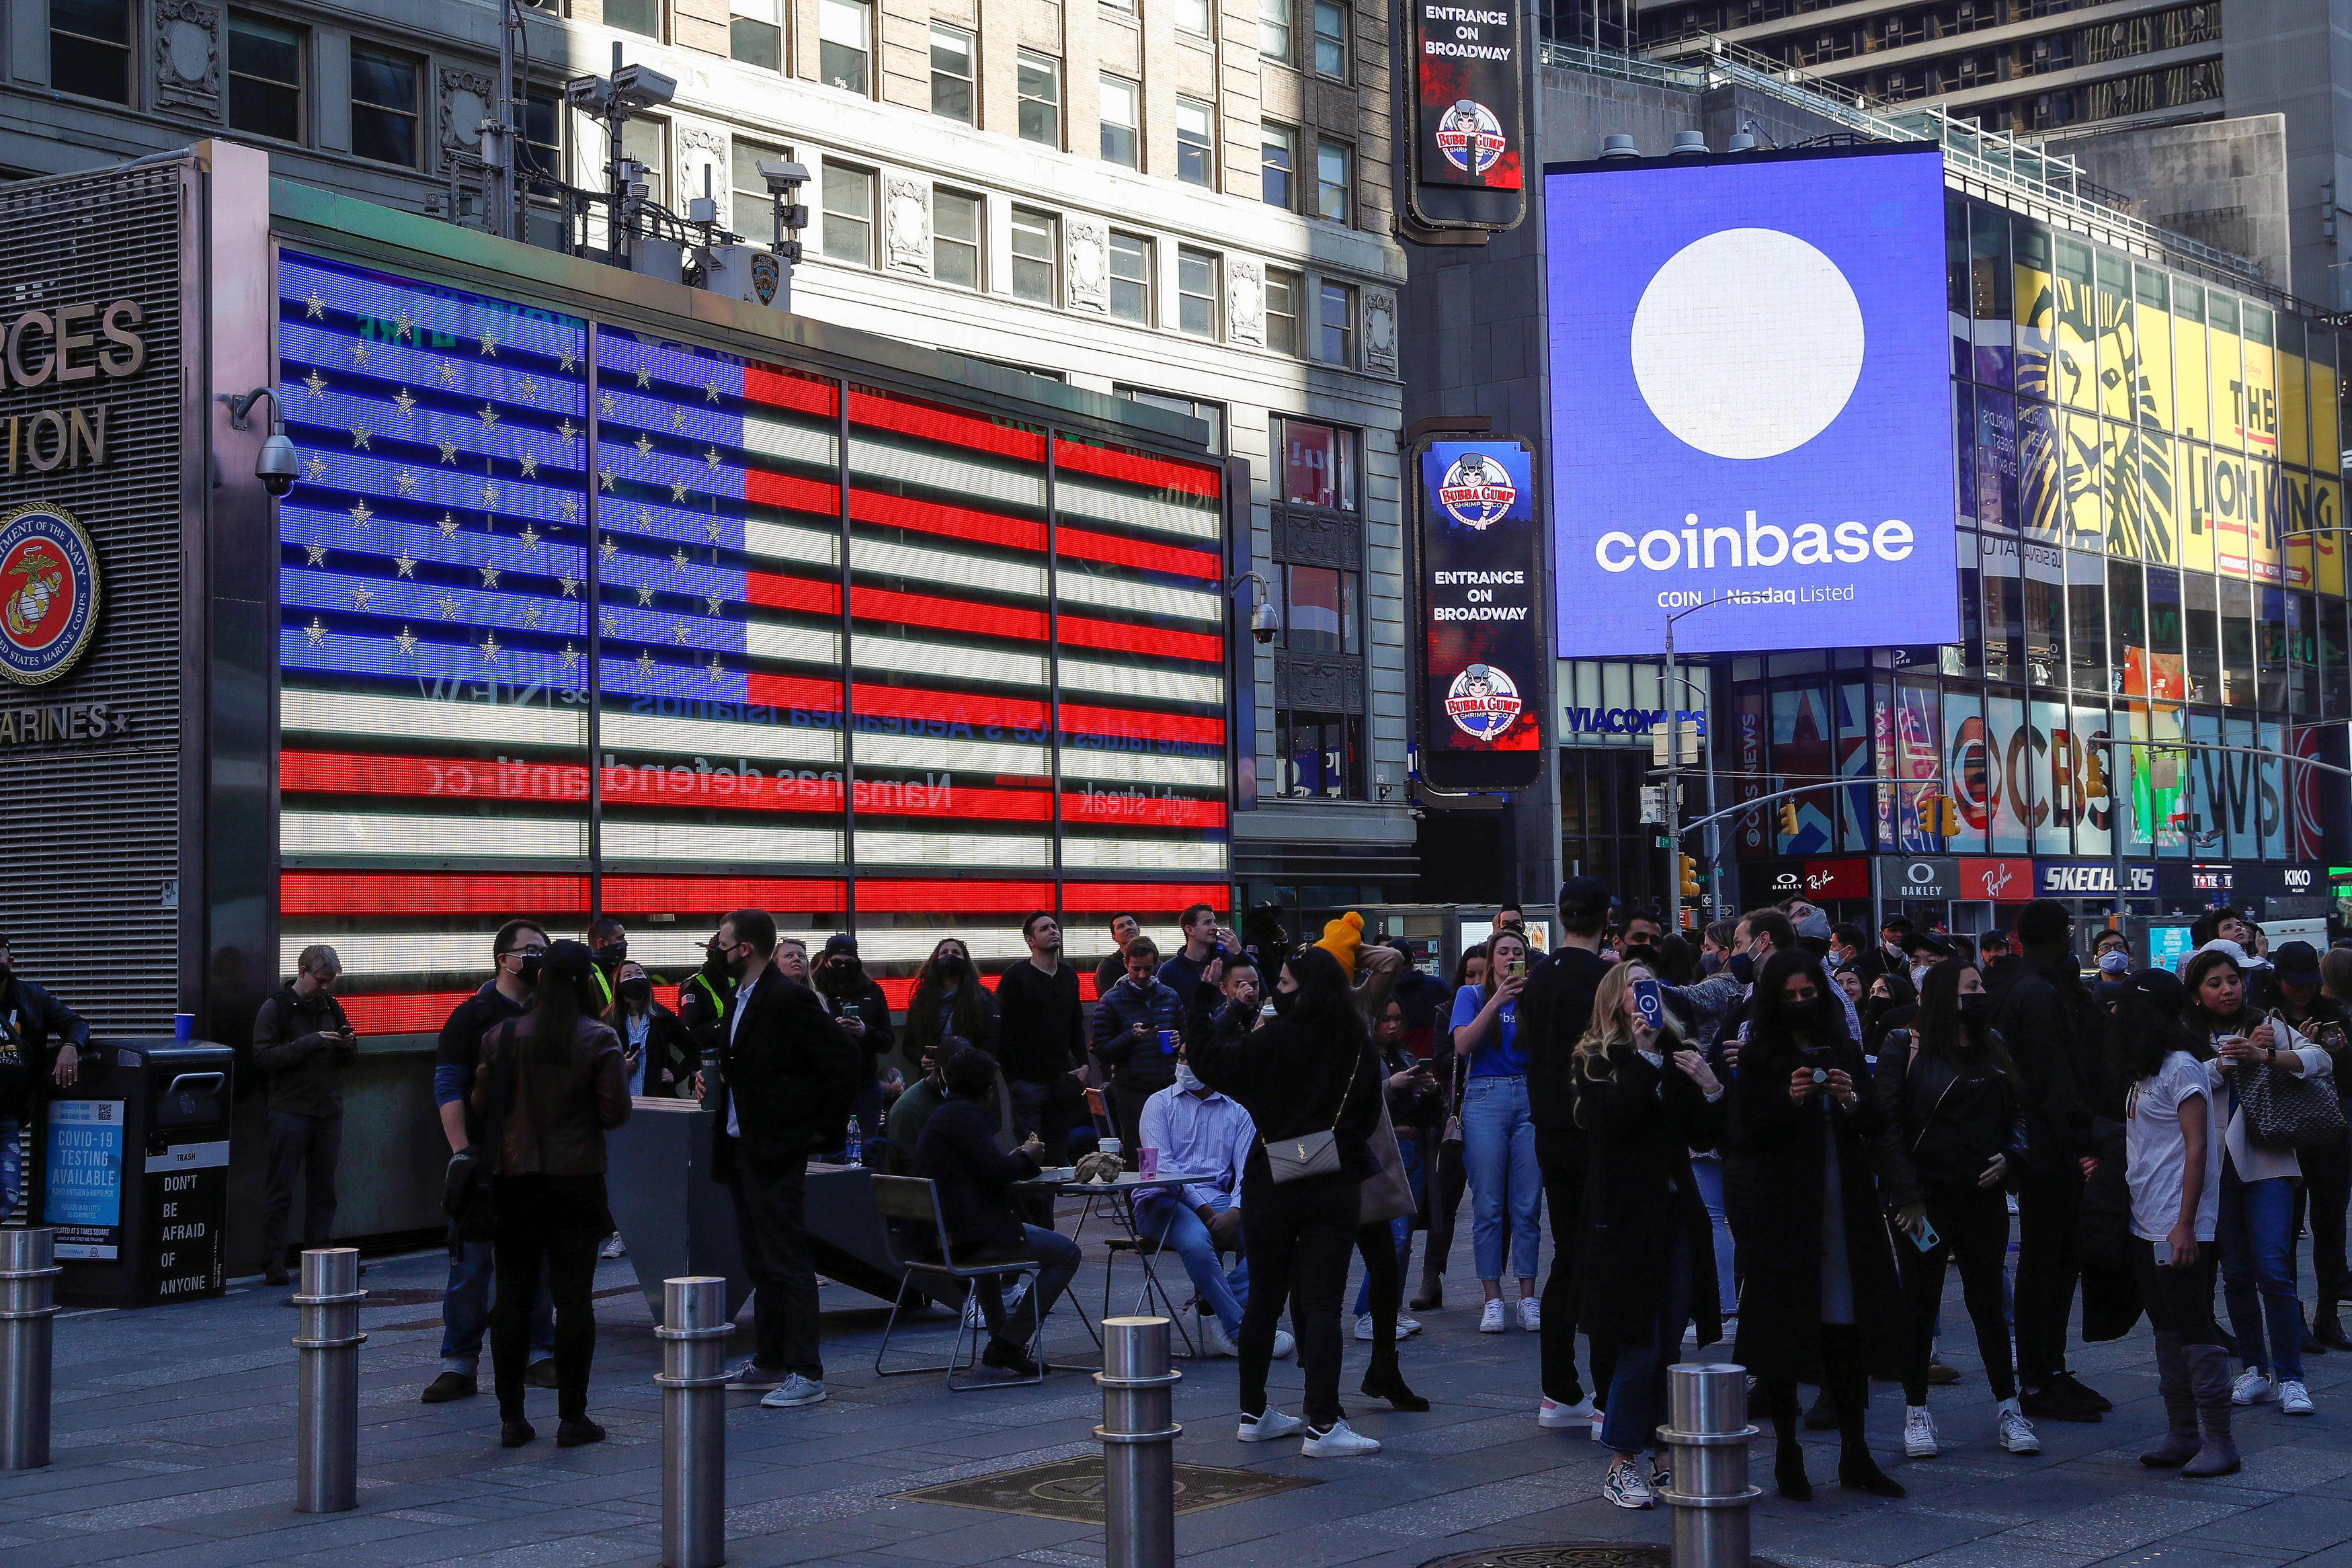 Bank of America downgrades Coinbase, says FTX collapse raises 'contagion risk' for crypto platform